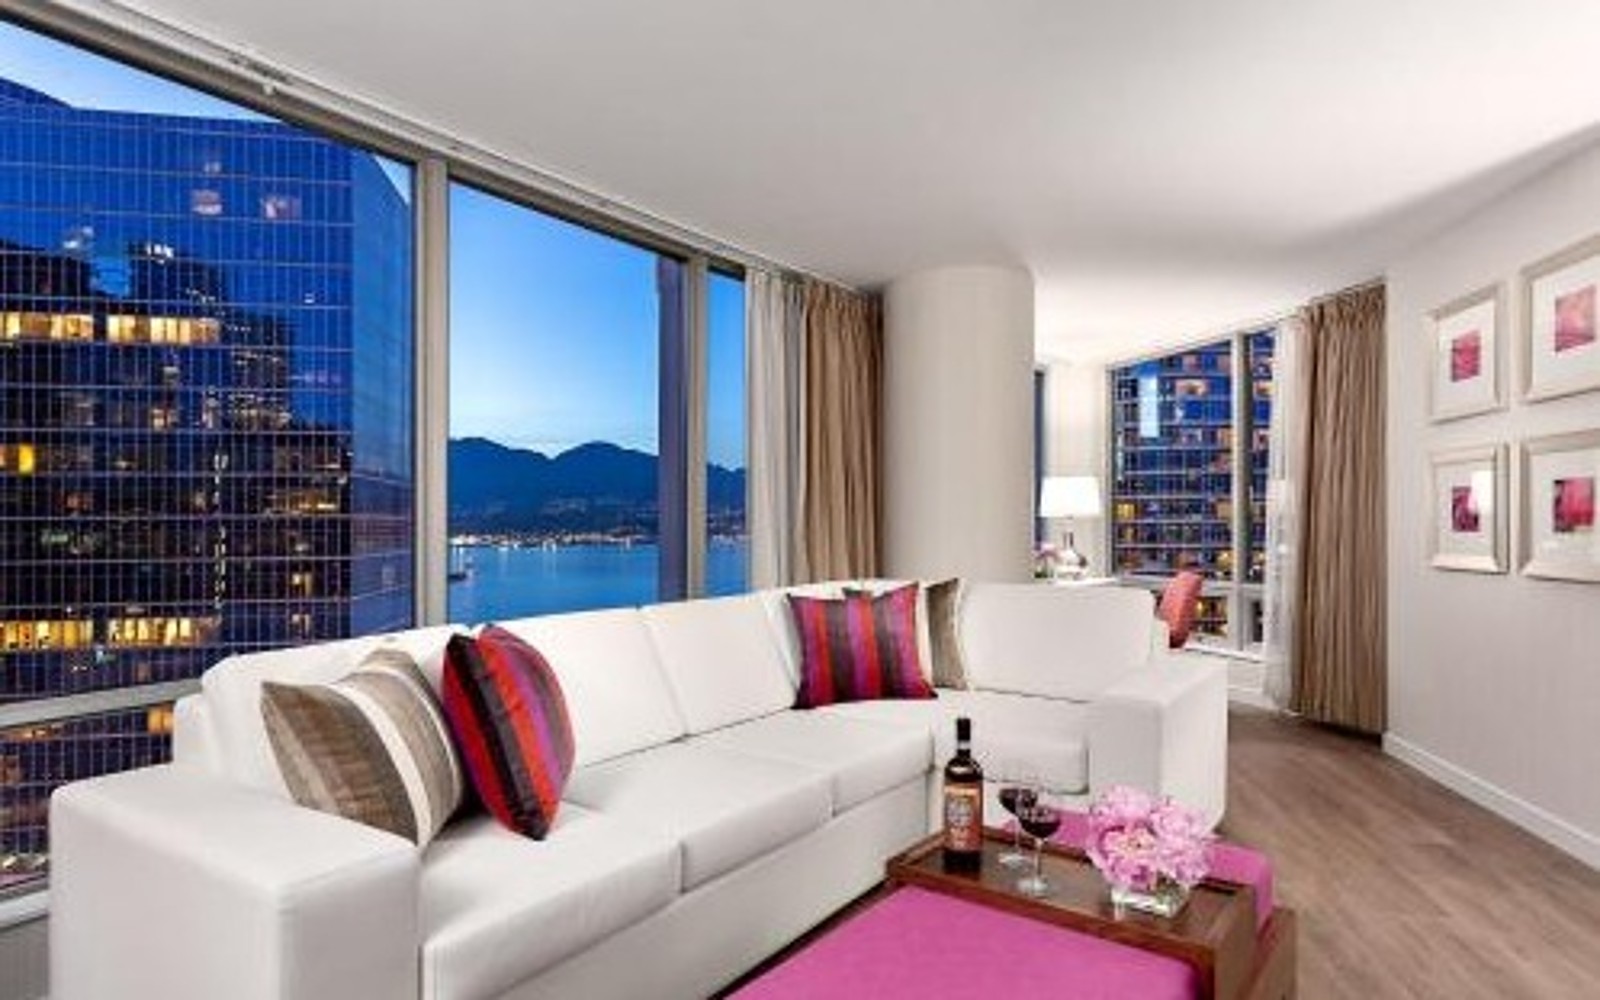 7 Best Hotels near Vancouver Convention Centre from $127.00 - Vancouver ...